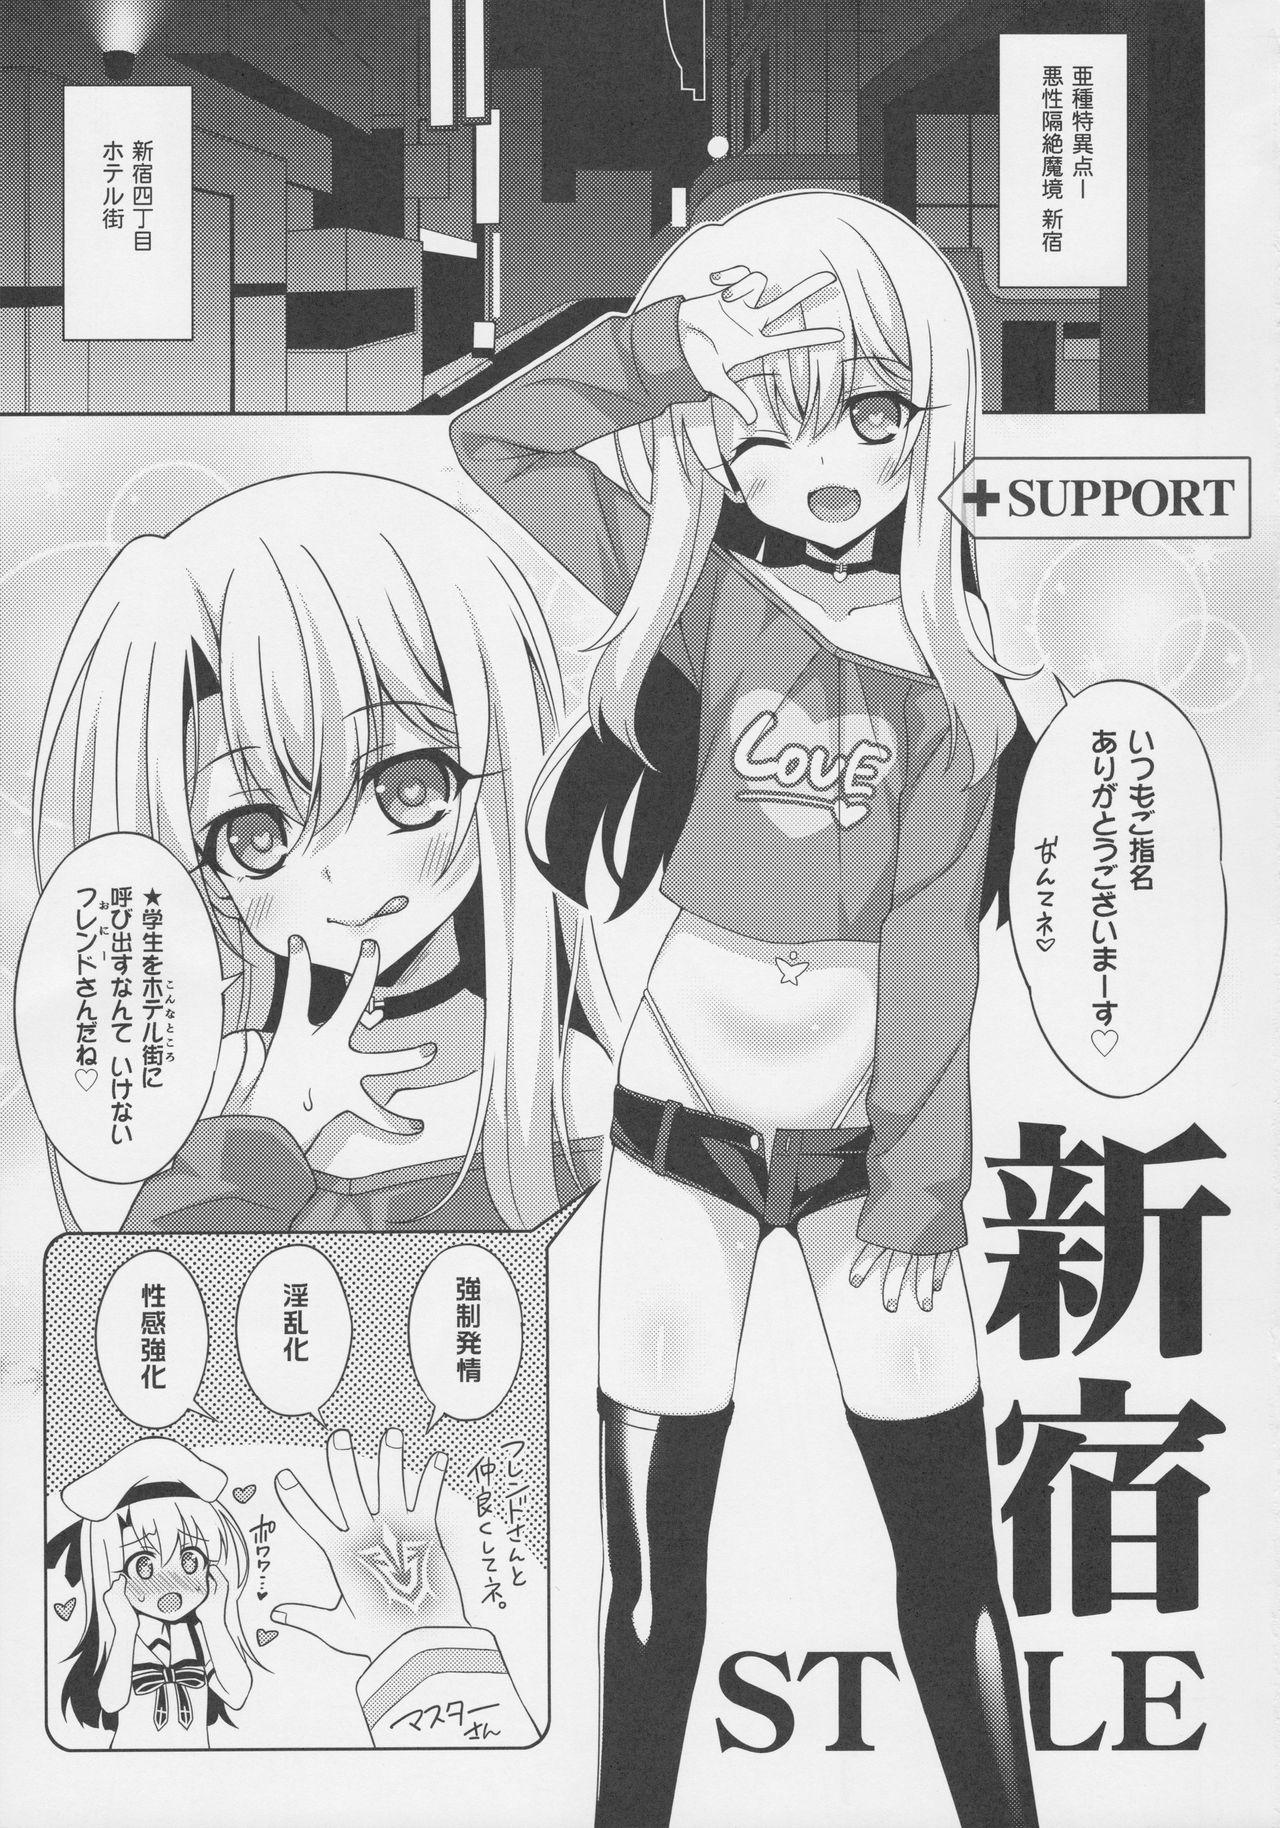 Amature Allure Illya-chan no Dosukebe Suppox - Fate grand order Gemidos - Page 4